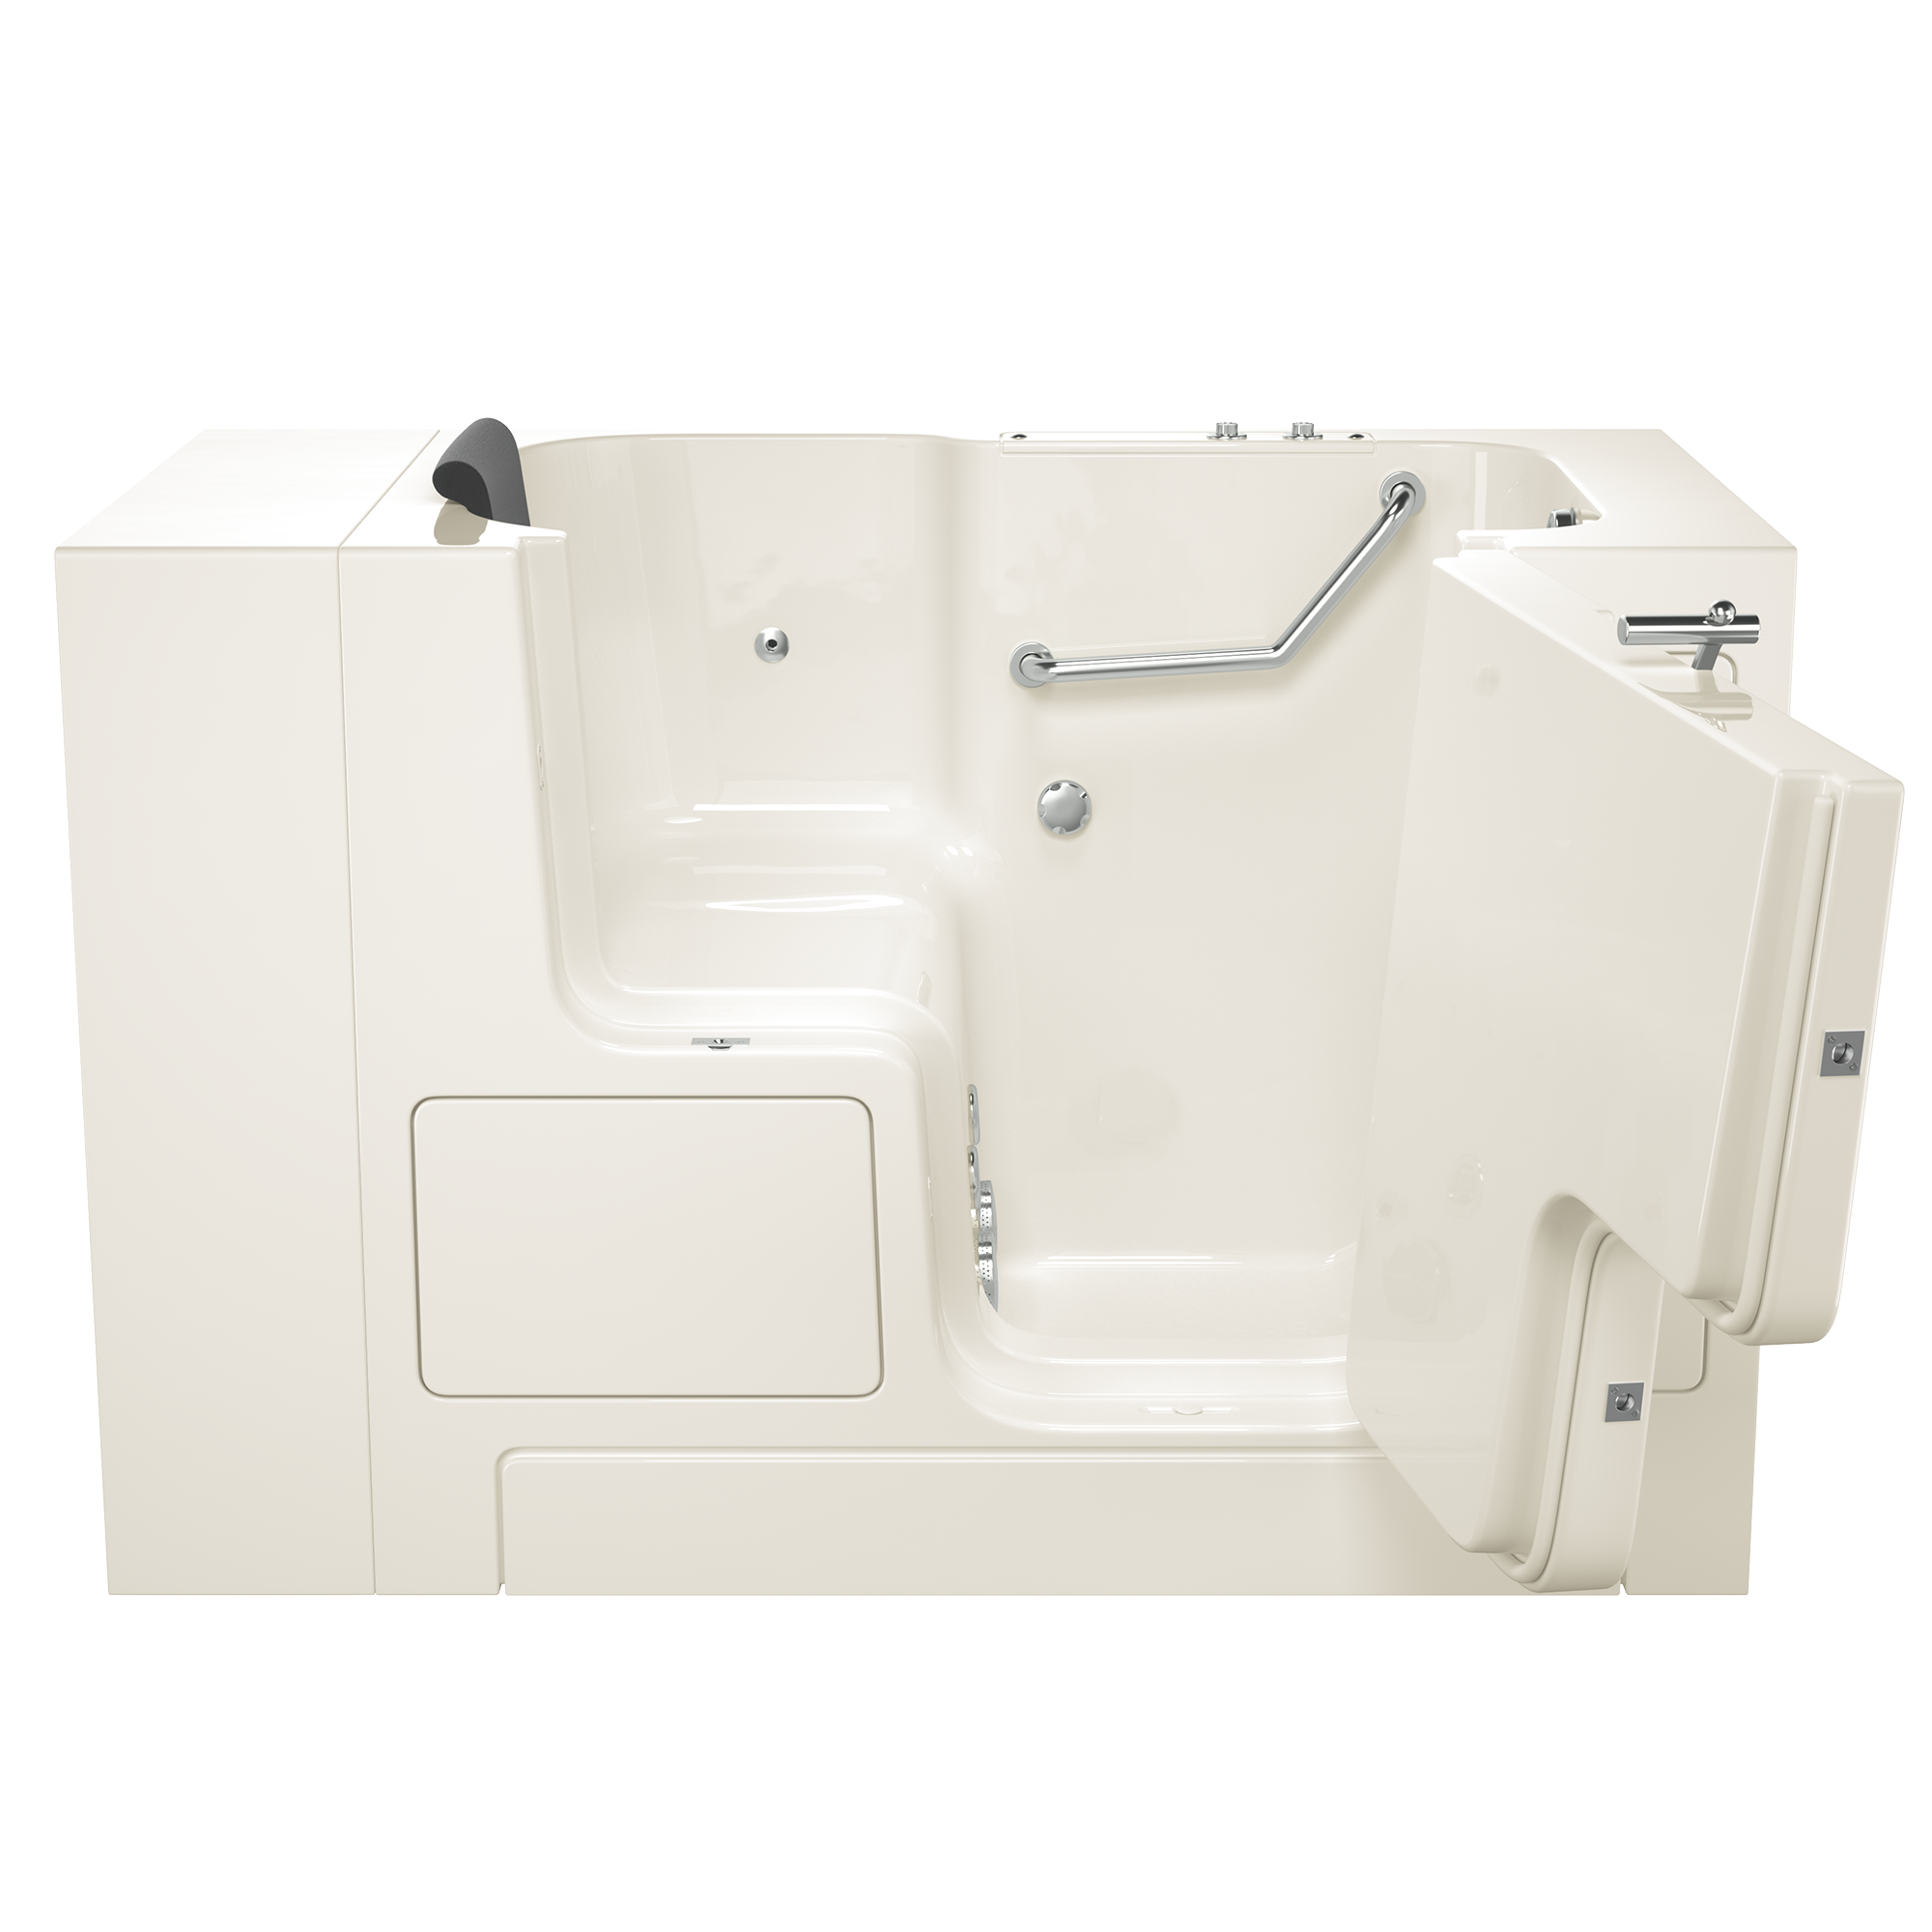 Gelcoat Premium Series 32 x 52 -Inch Walk-in Tub With Whirlpool System - Right-Hand Drain